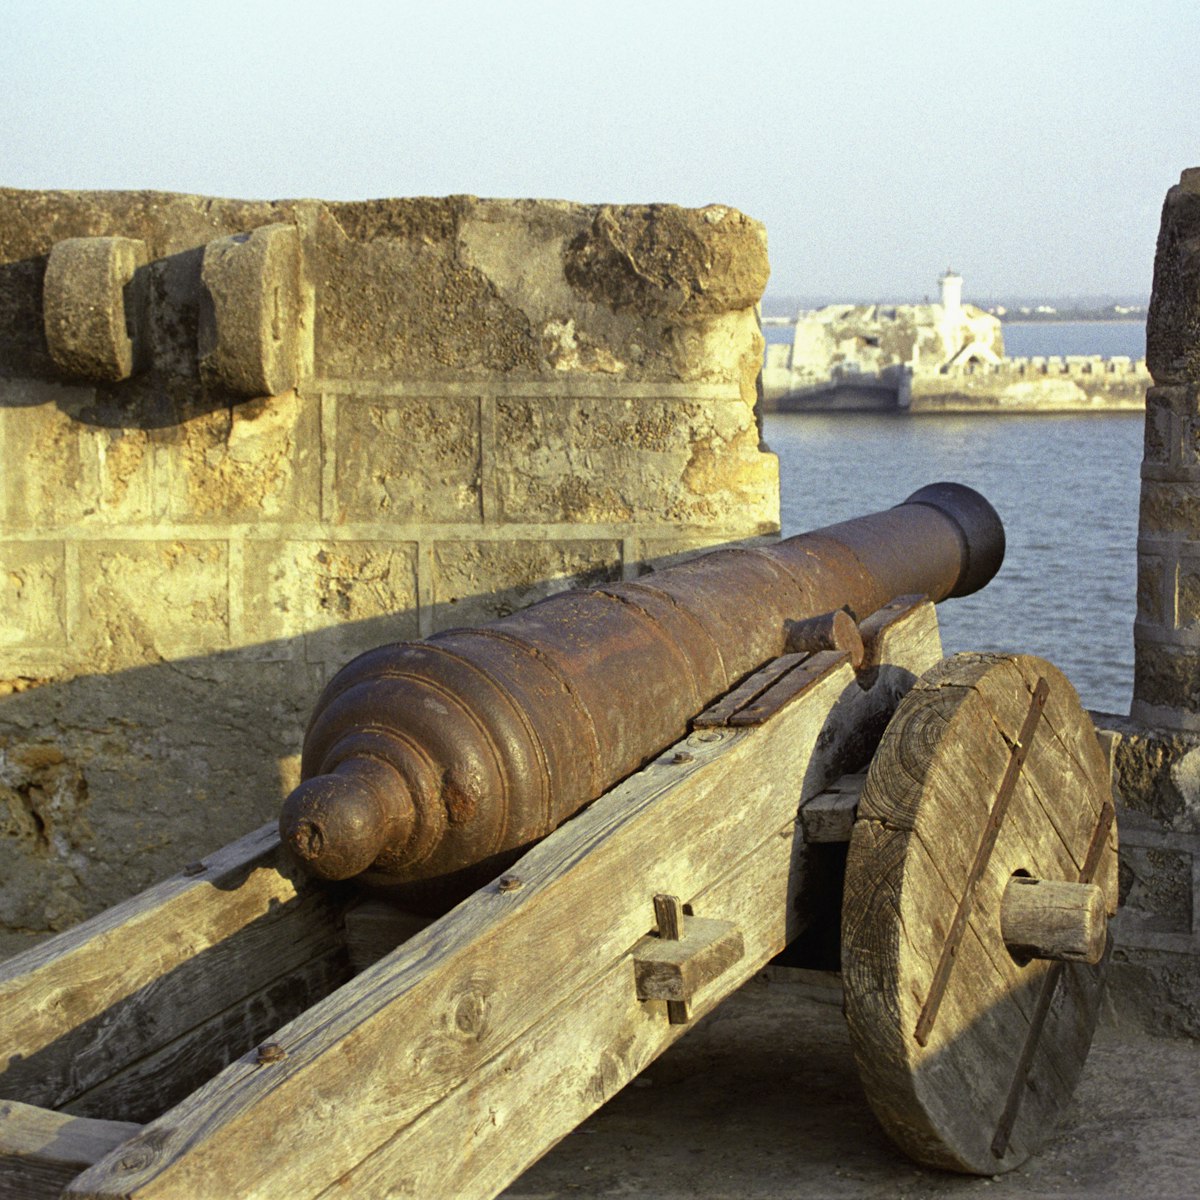 Portuguese fort in Diu, Gujarat, India. (Photo by: IndiaPictures/UIG via Getty Images)